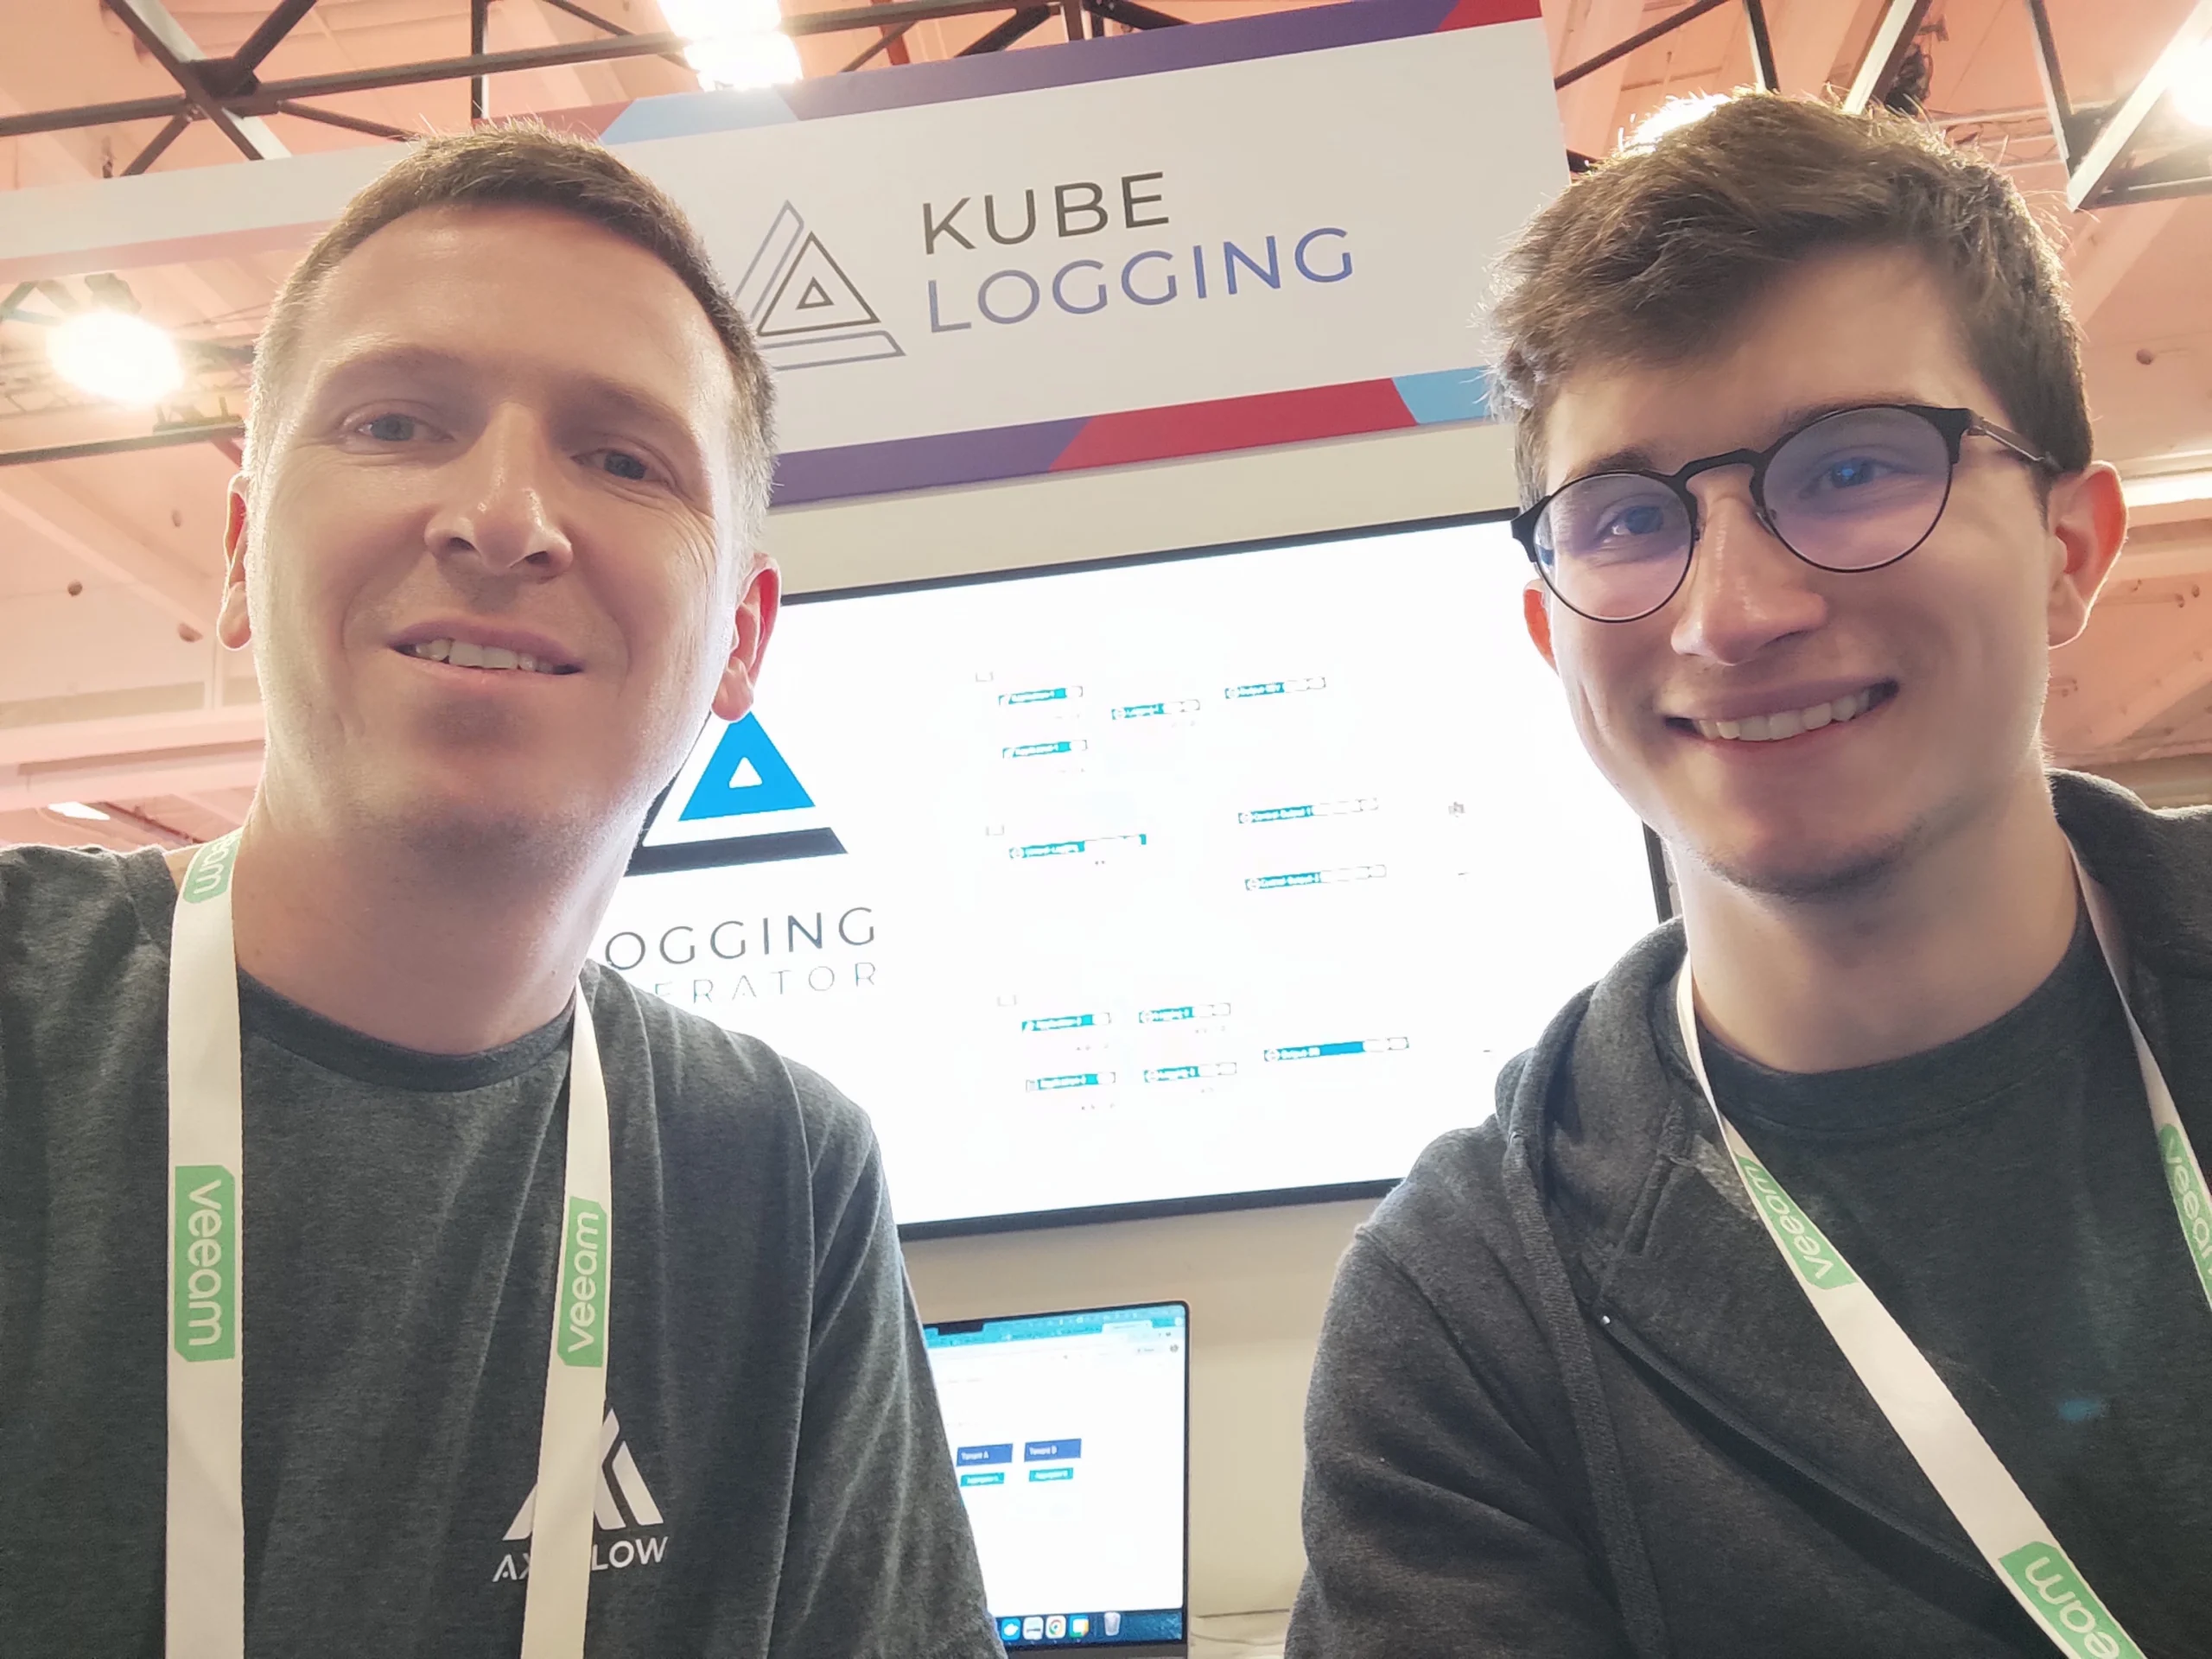 Logging operator CNCF booth at KubeCon